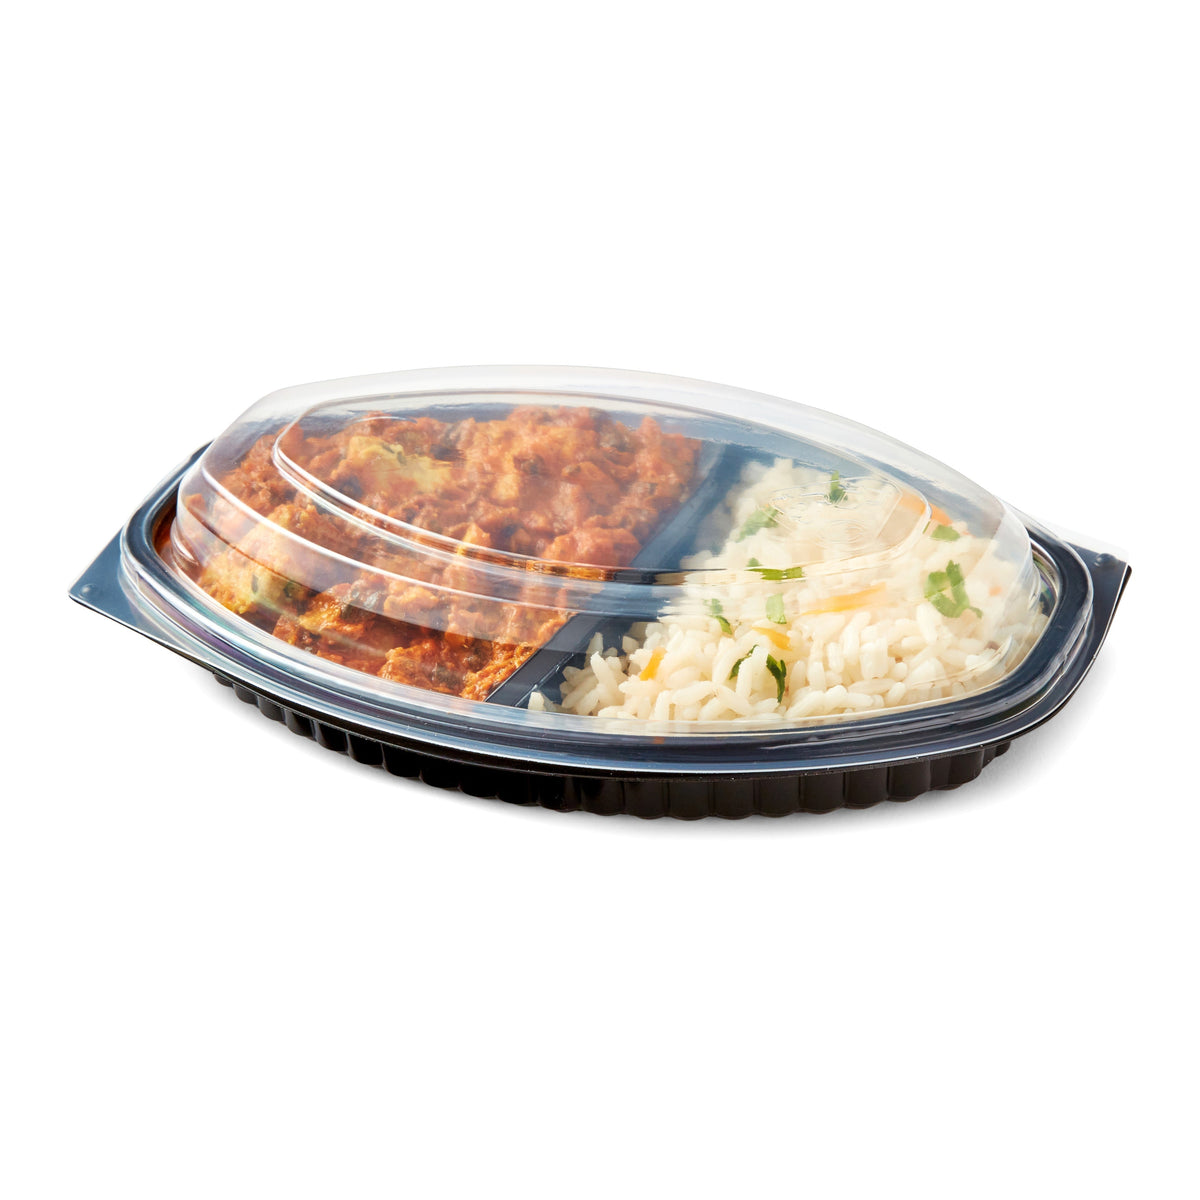 30 x 560 ml (19.8 ounce) Microwavable Twin Hot Food Meal Prep Trays & Lids (207mm x 143mm x 59mm)